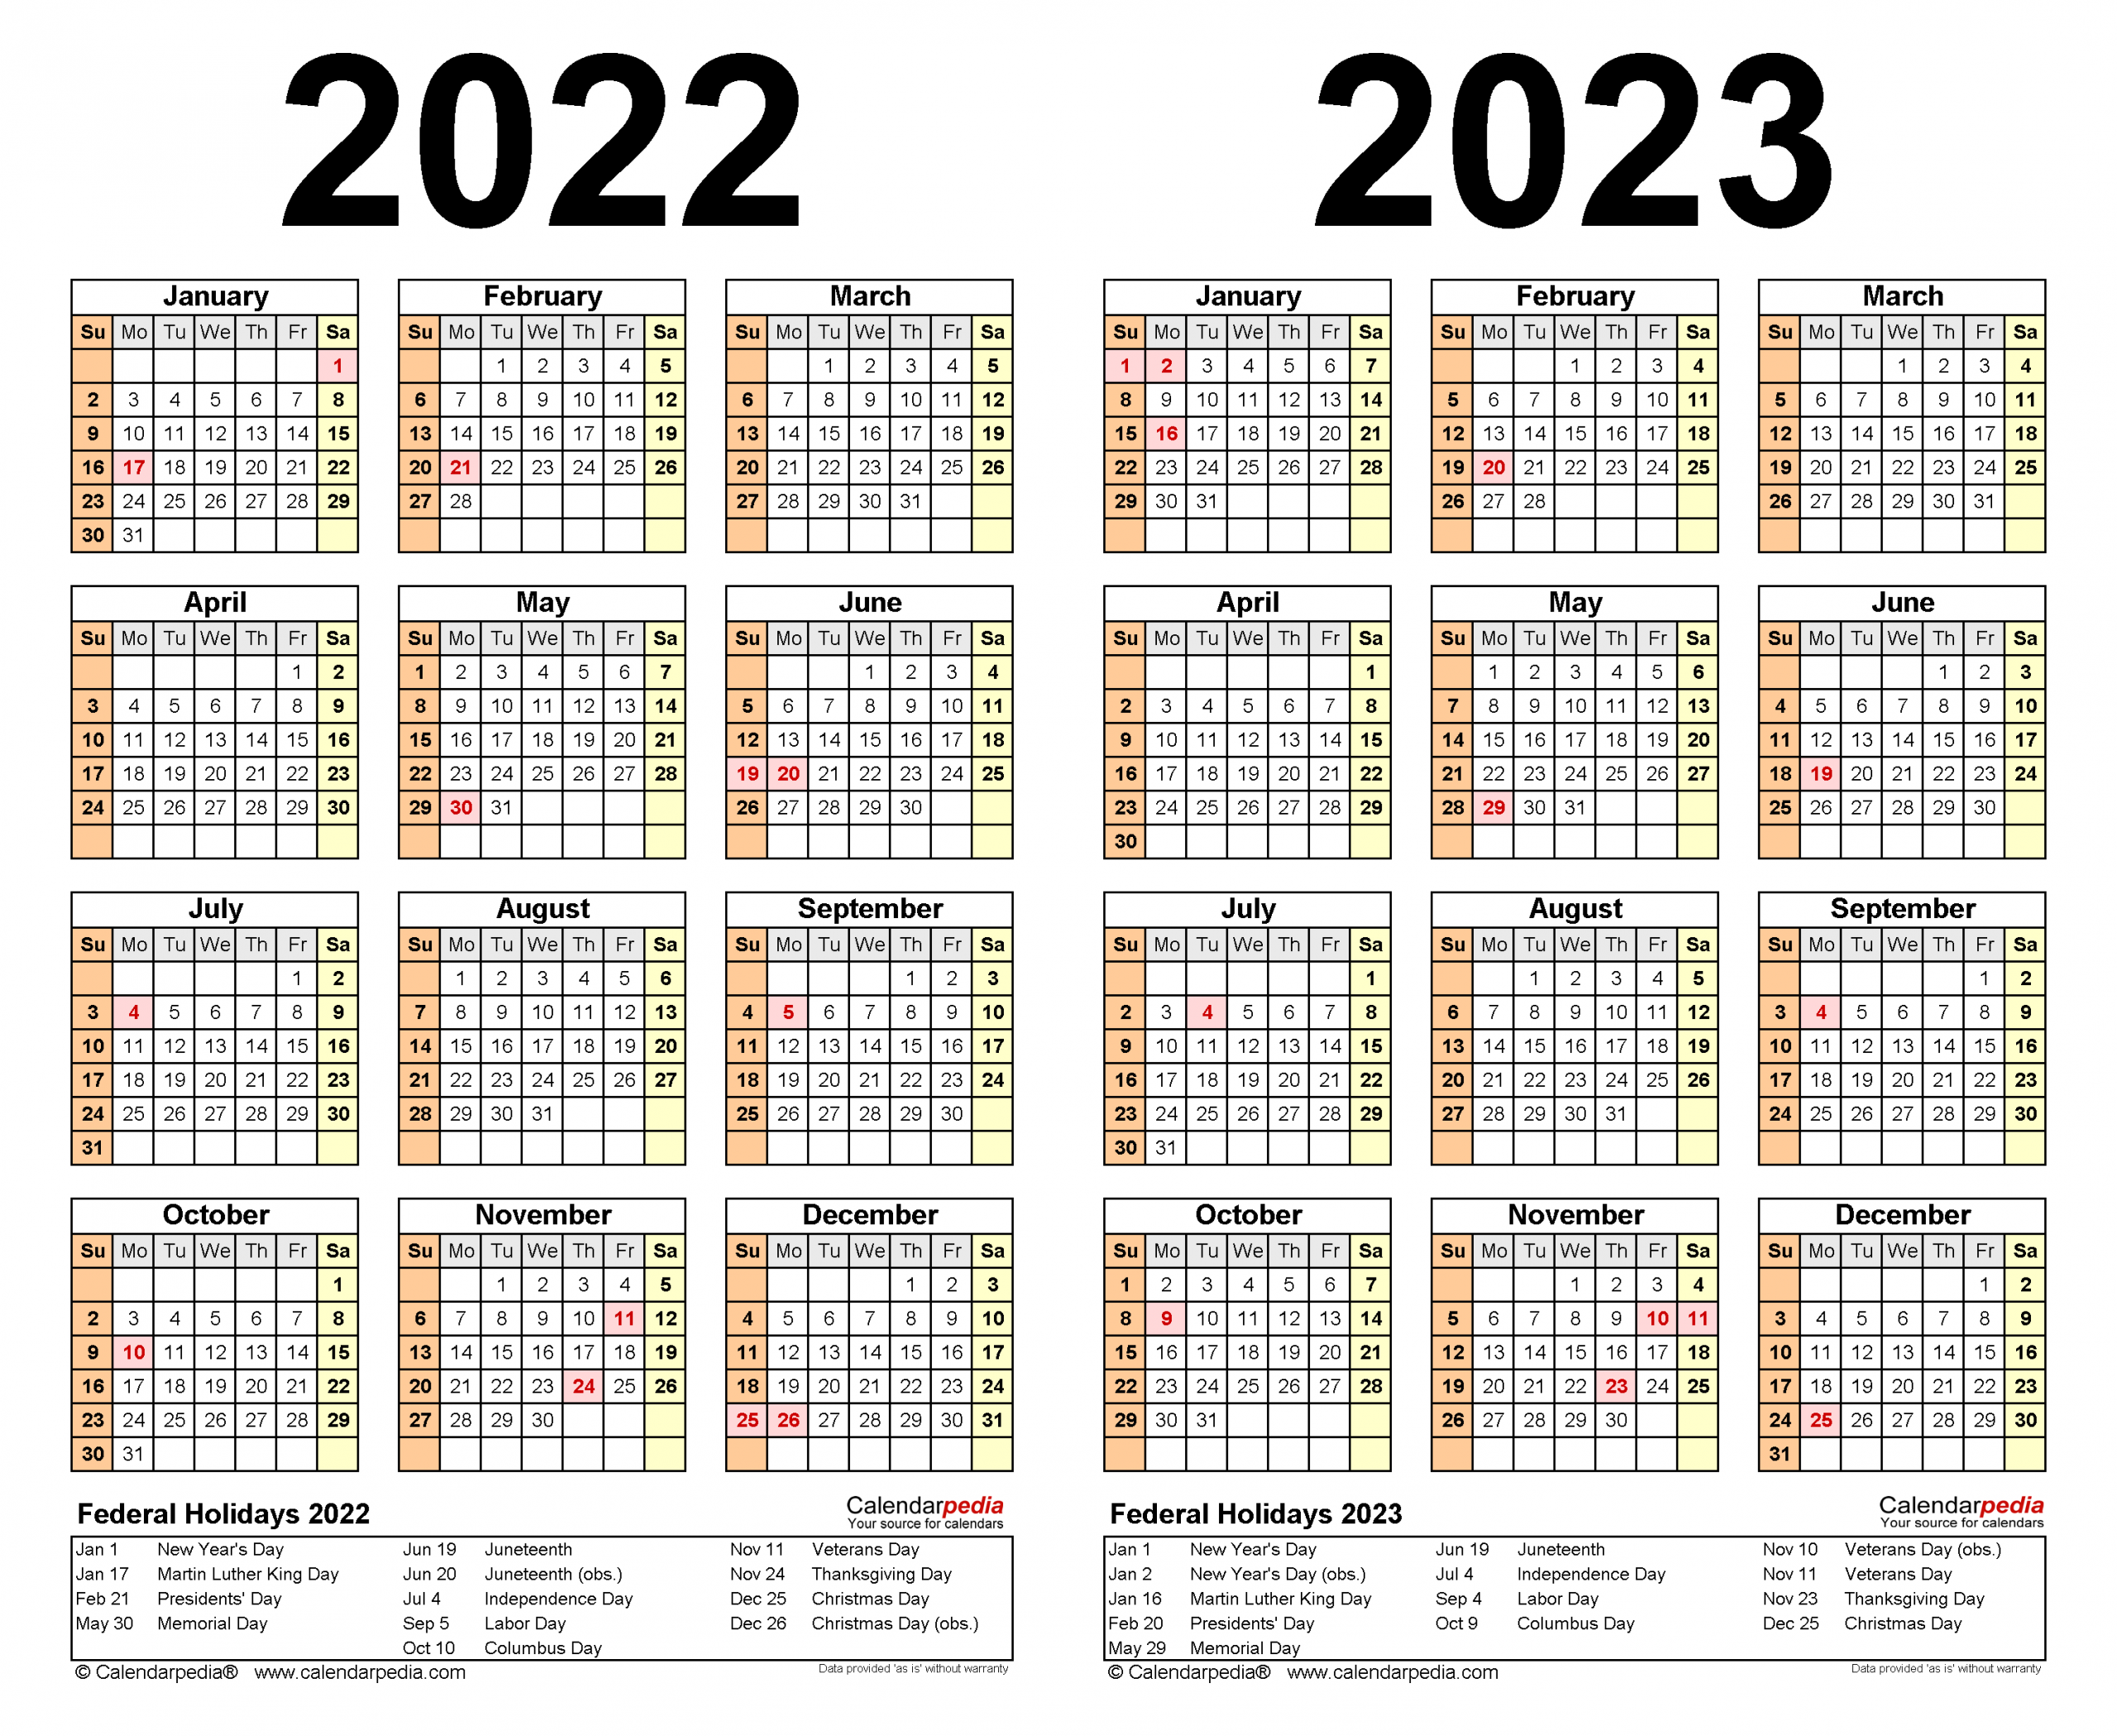 View 2 Year Calendar 2022 And 2023 Pics - All In Here